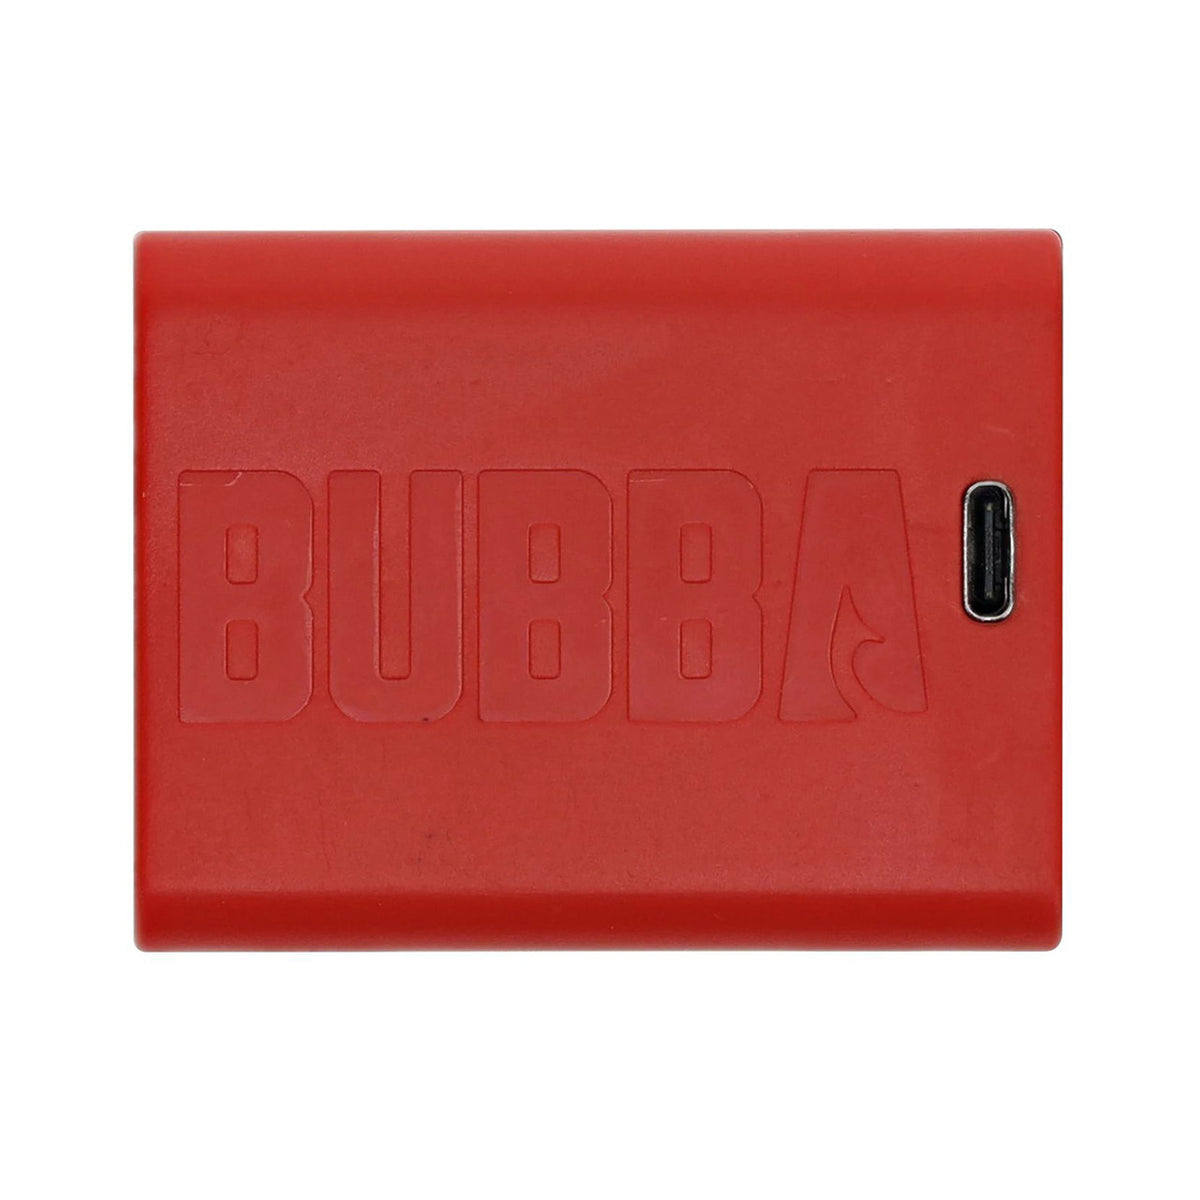 Bubba Smart Scale Lithium Ion Rechargeable Battery